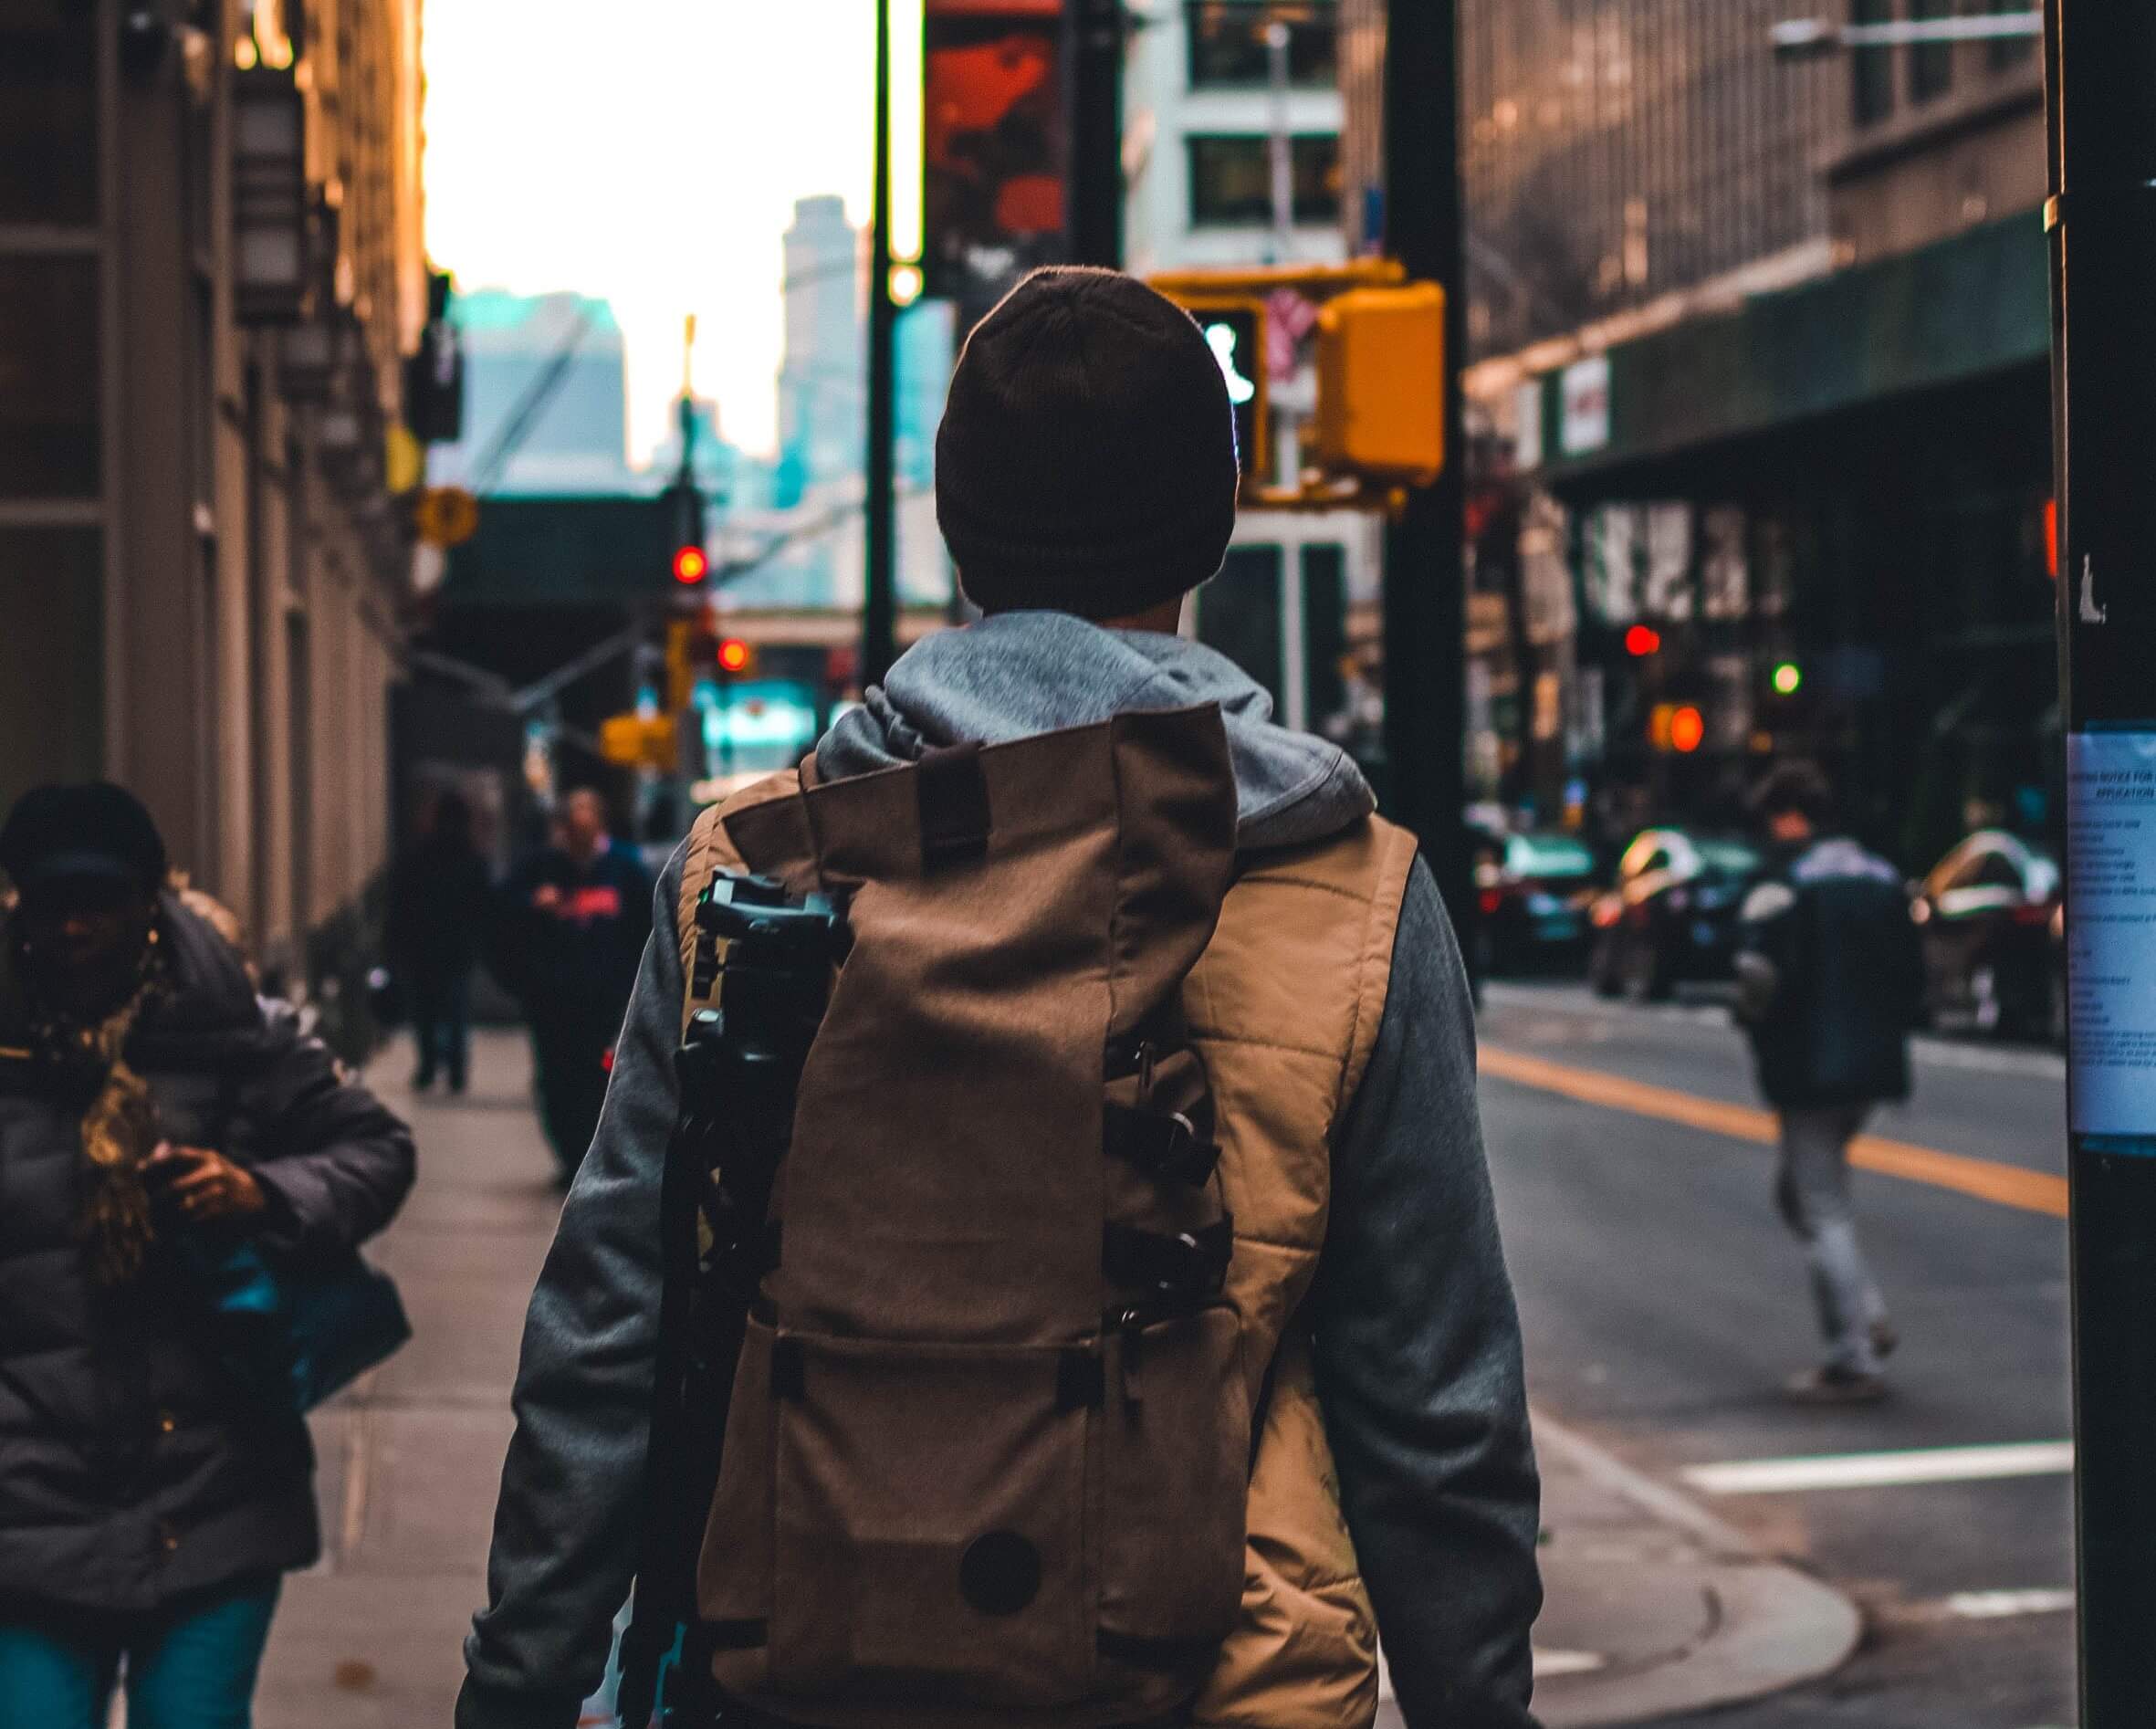 A man with his back facing the camera walks through a crosswalk in a bustling city.